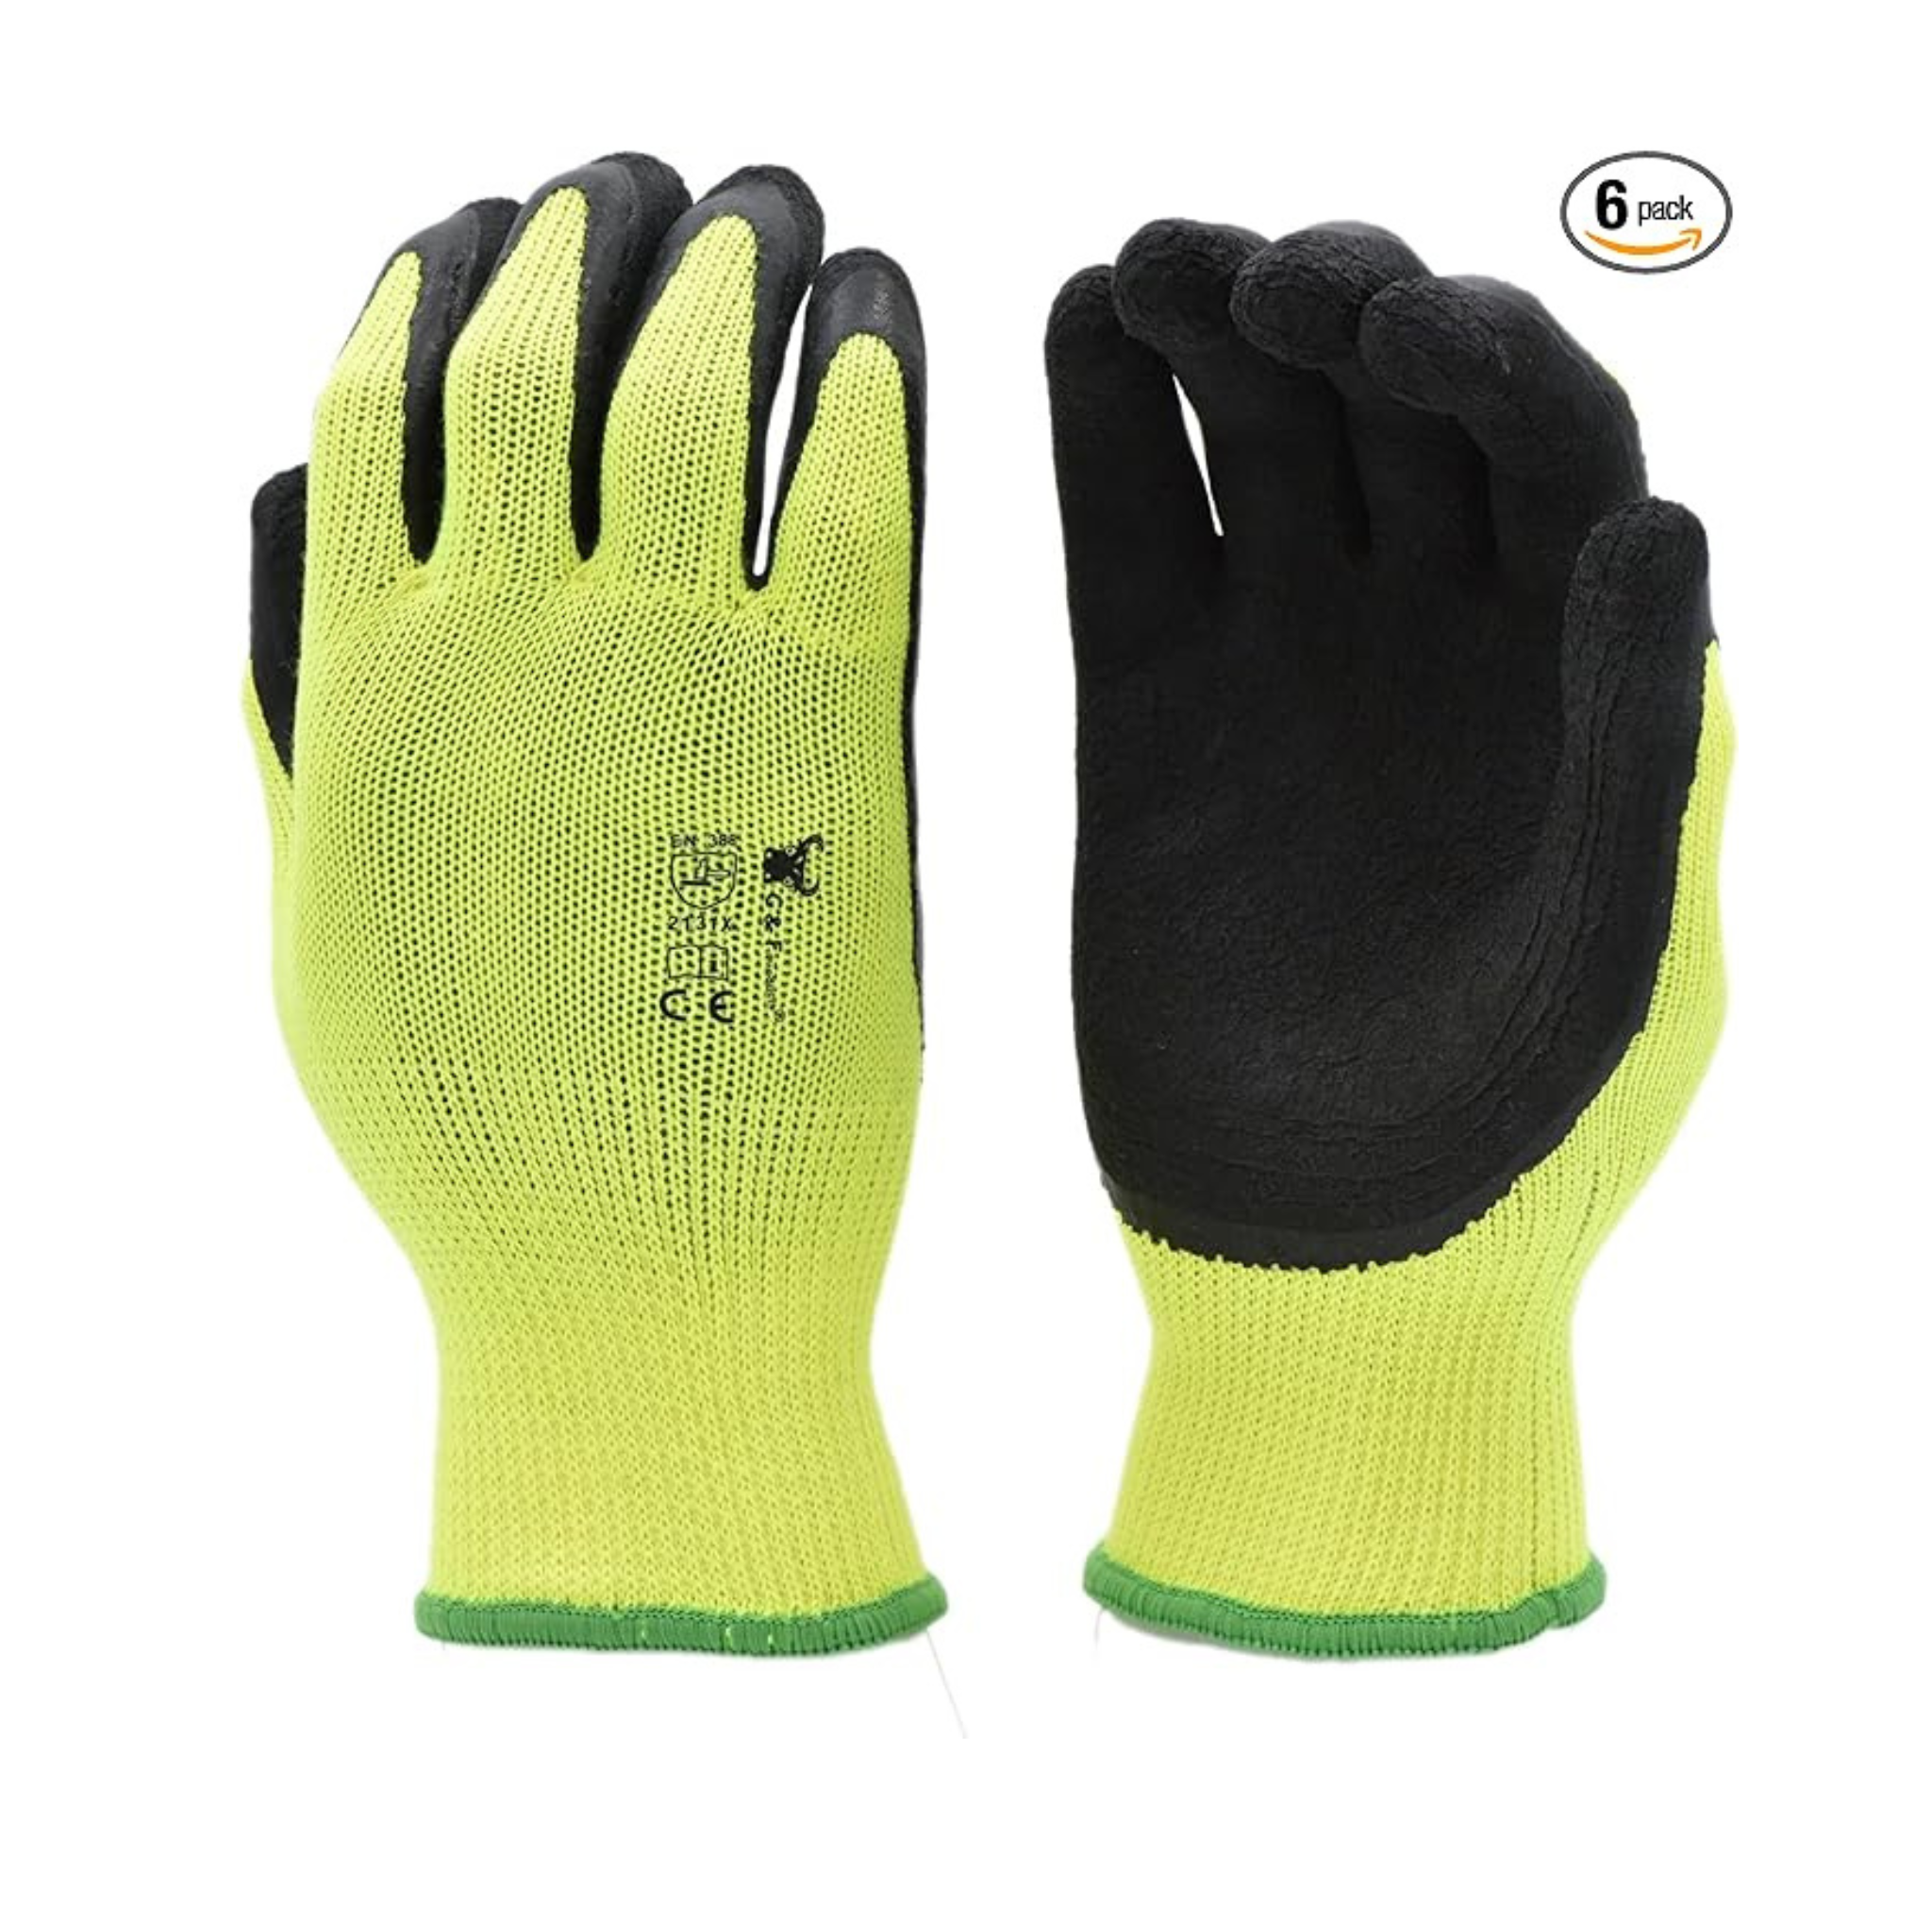 6-Pack Premium High Visibility Low Emissions Work and Gardening Gloves